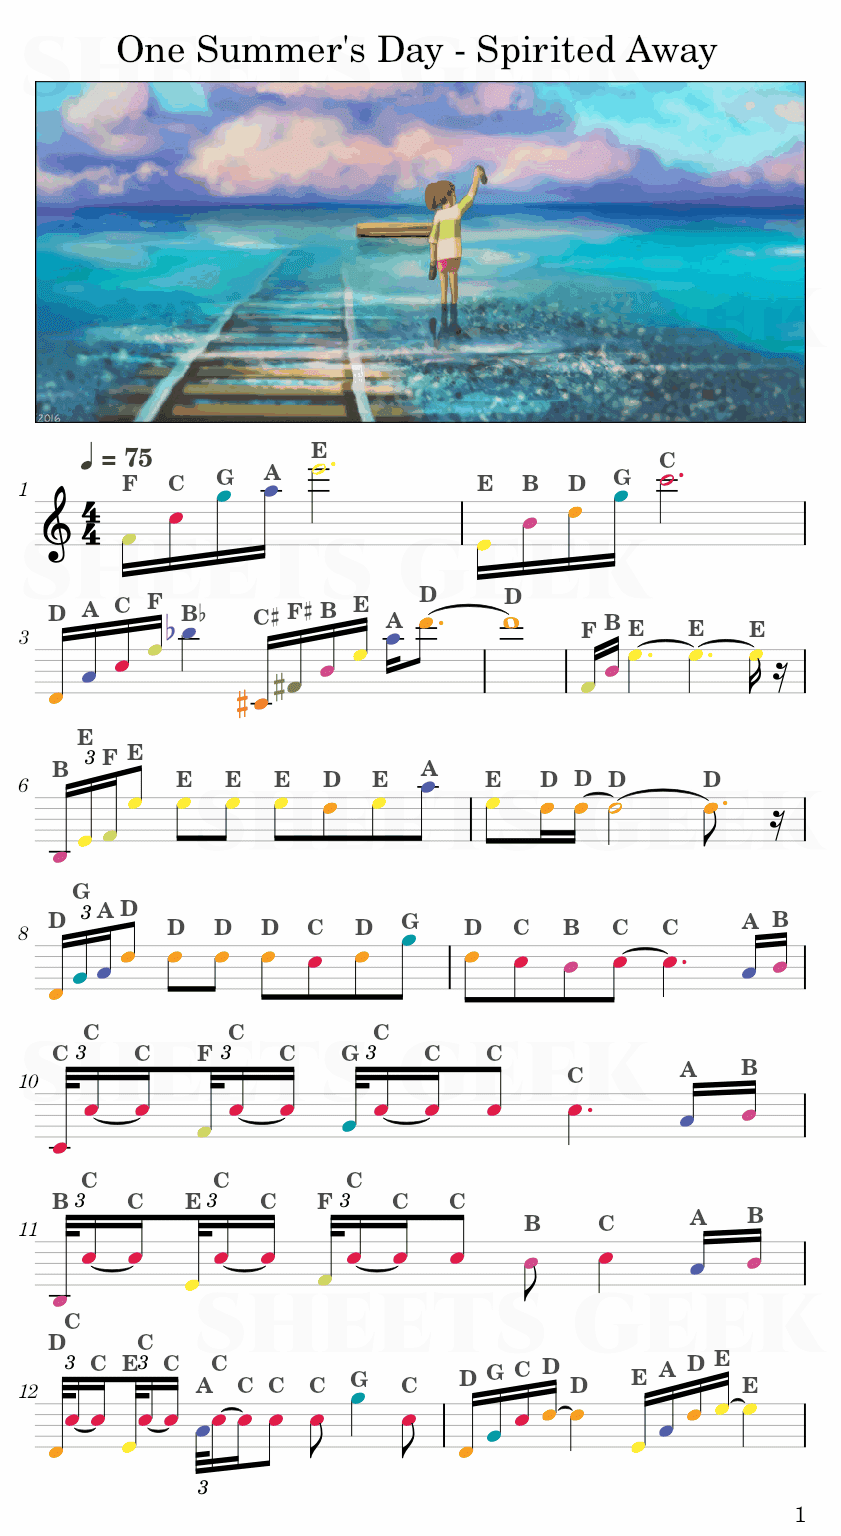 One Summer's Day - Spirited Away Easy Sheets Music Free for piano, keyboard, flute, violin, sax, celllo 1